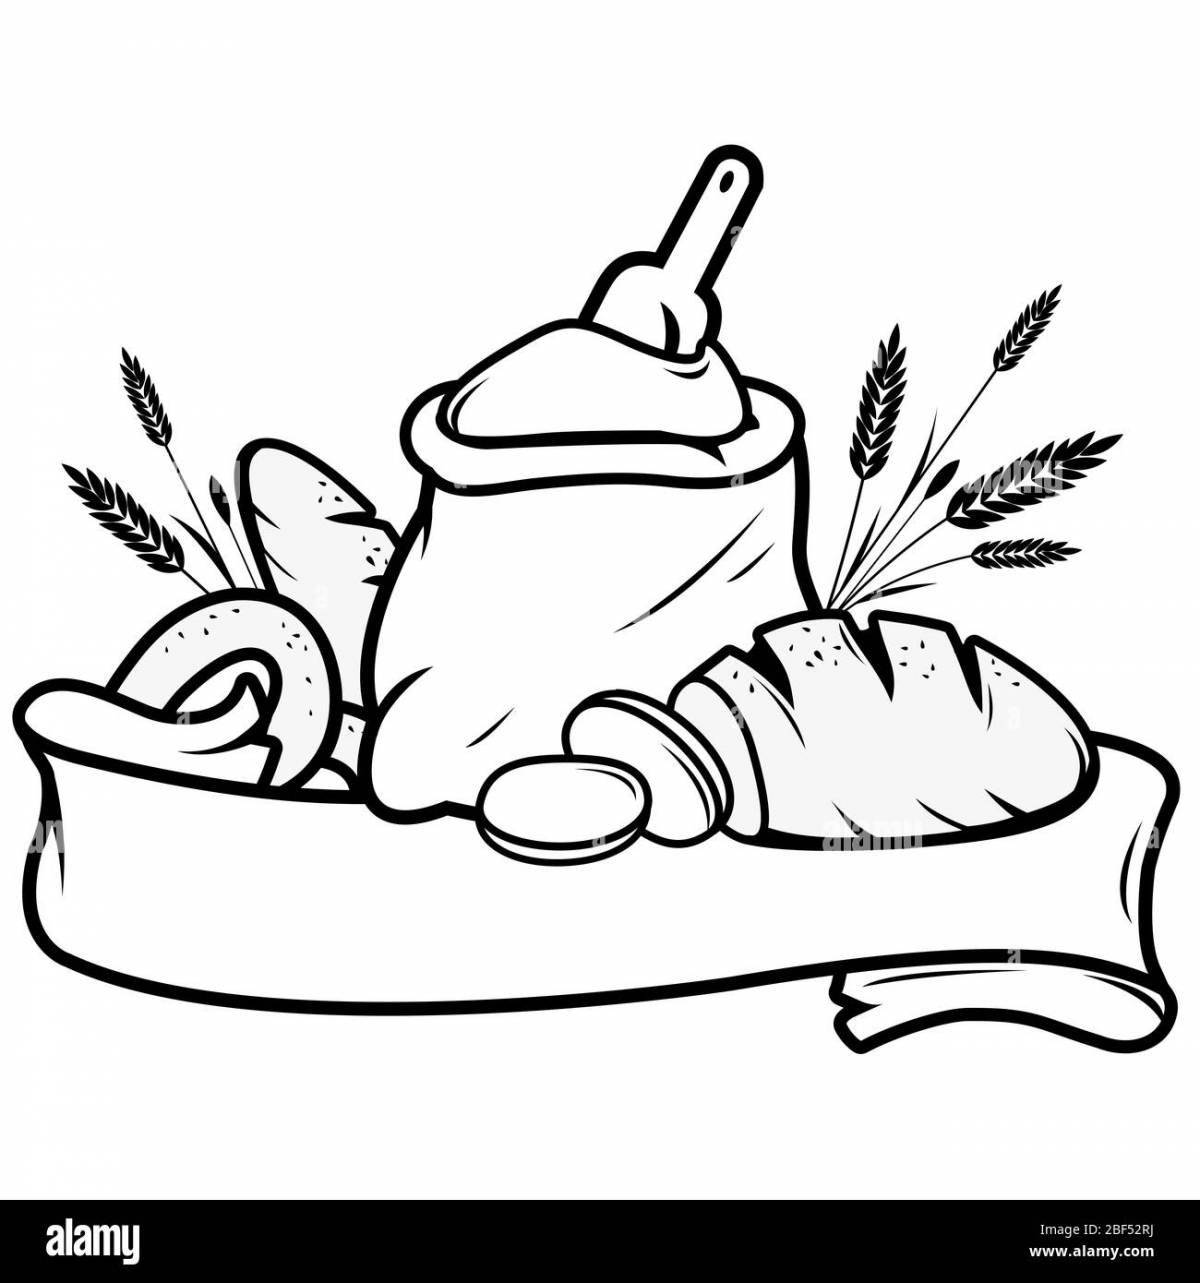 Appetizing loaf of bread coloring book for kids